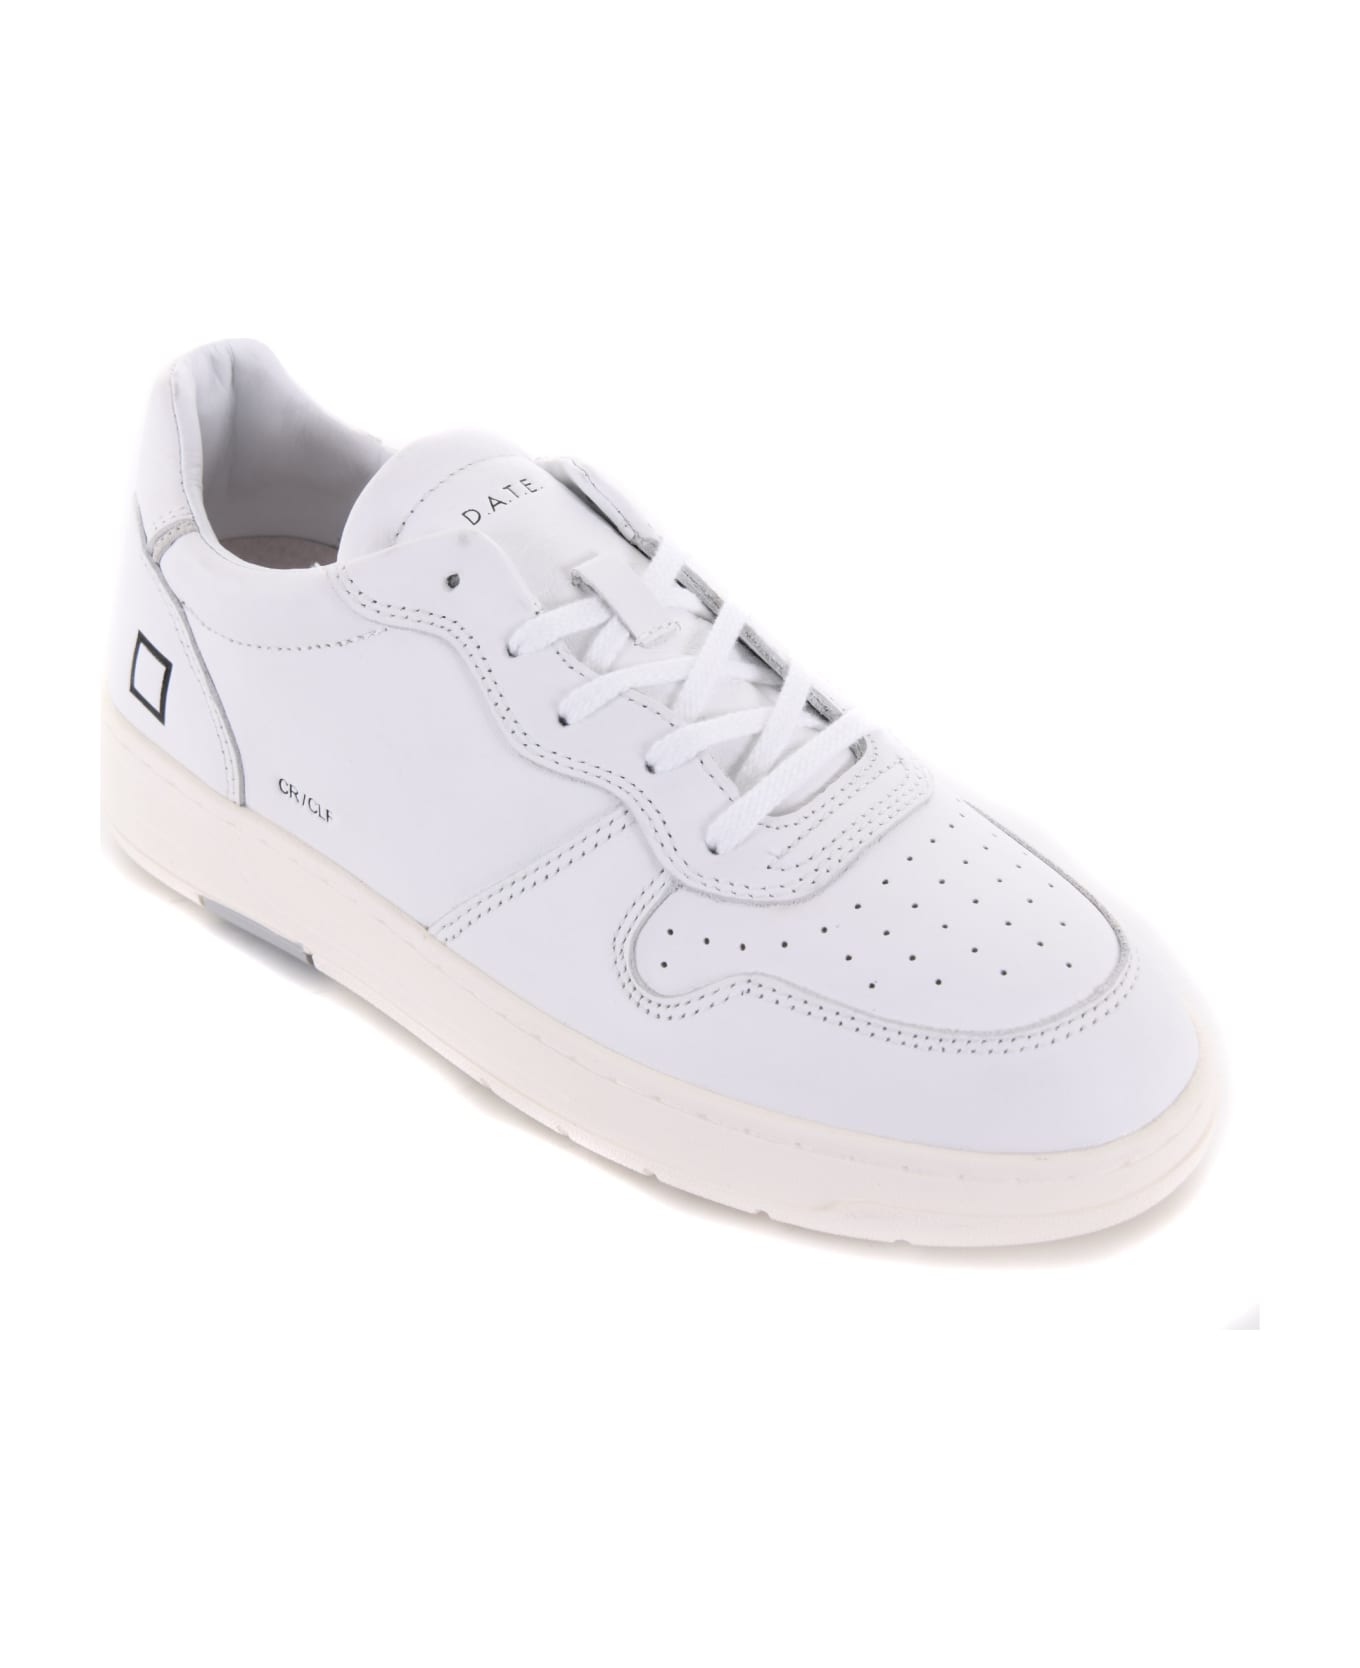 D.A.T.E. Sneakers "court Calf" Leather - Bianco